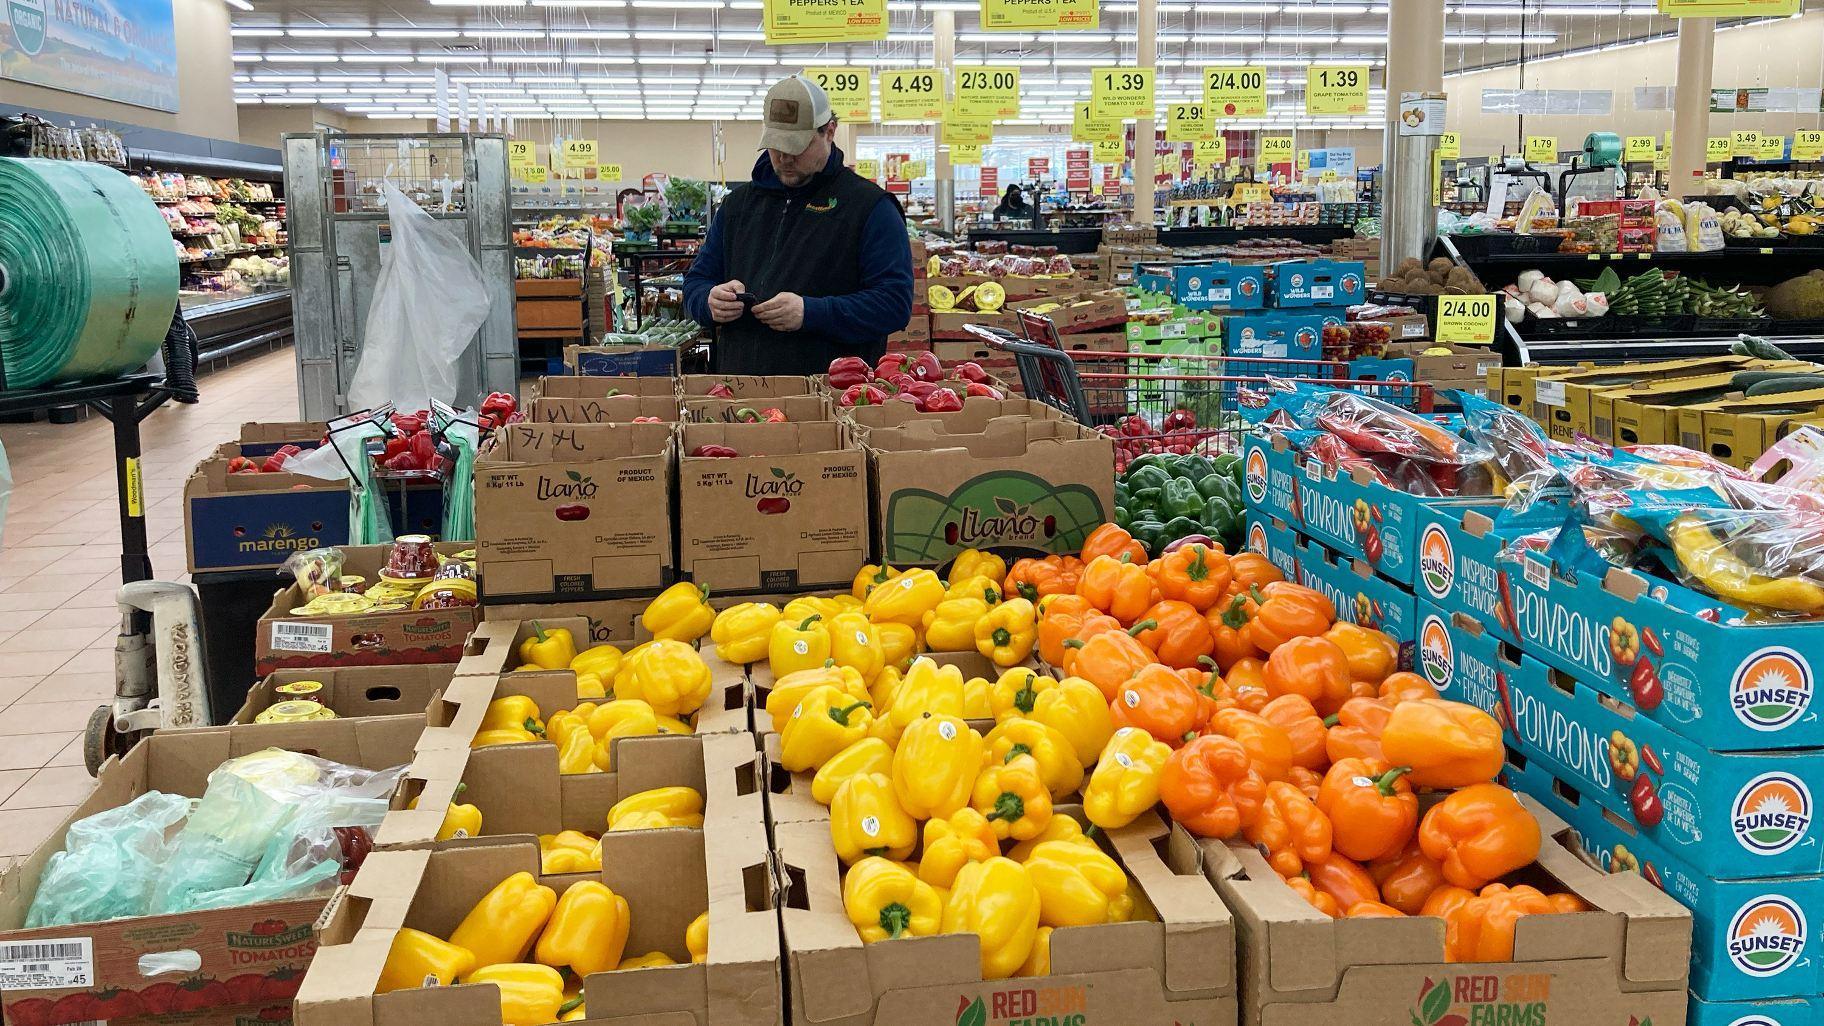 A man looks at his mobile phone while shopping at a grocery store in Buffalo Grove, Ill., Sunday, March 19, 2023. On Wednesday, the Labor Department reports on U.S. consumer prices for March. (AP Photo / Nam Y. Huh)